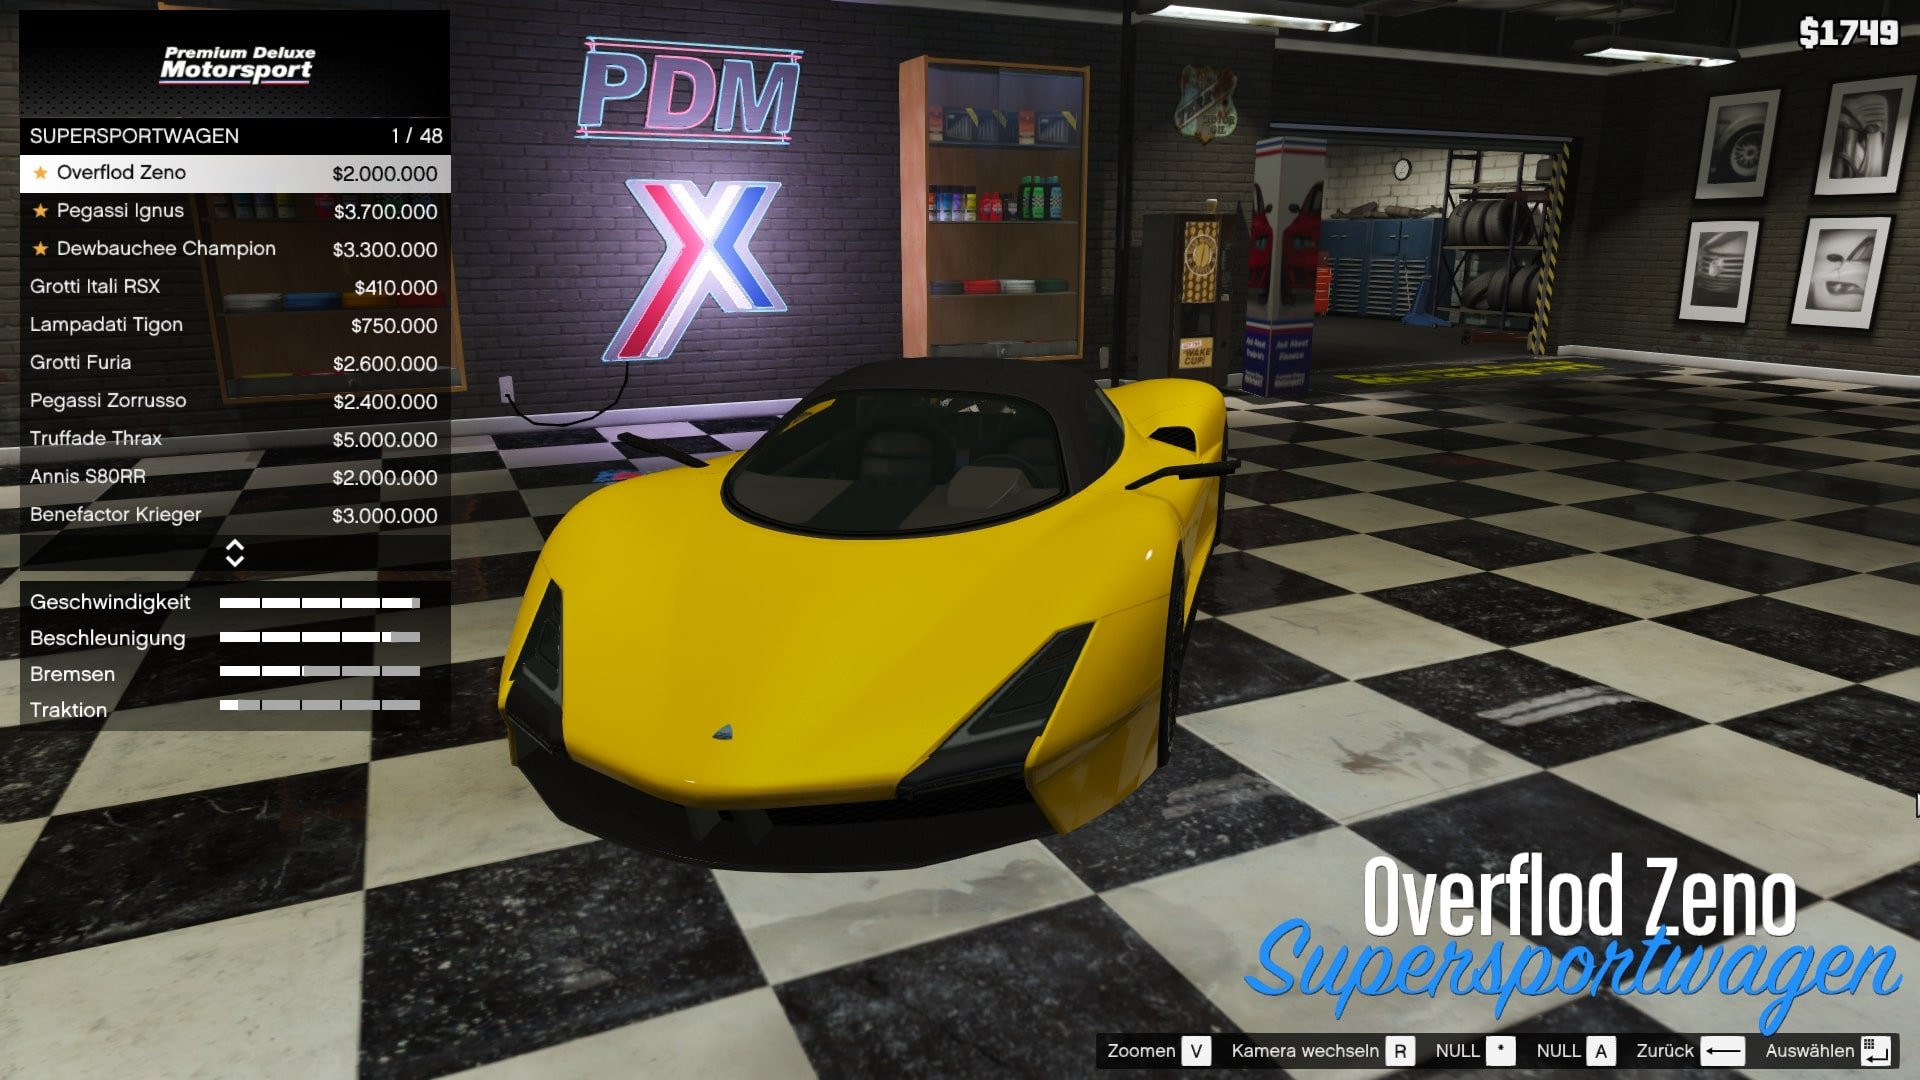 15 Must have Mods for GTA 5 – I'm Not MentaL